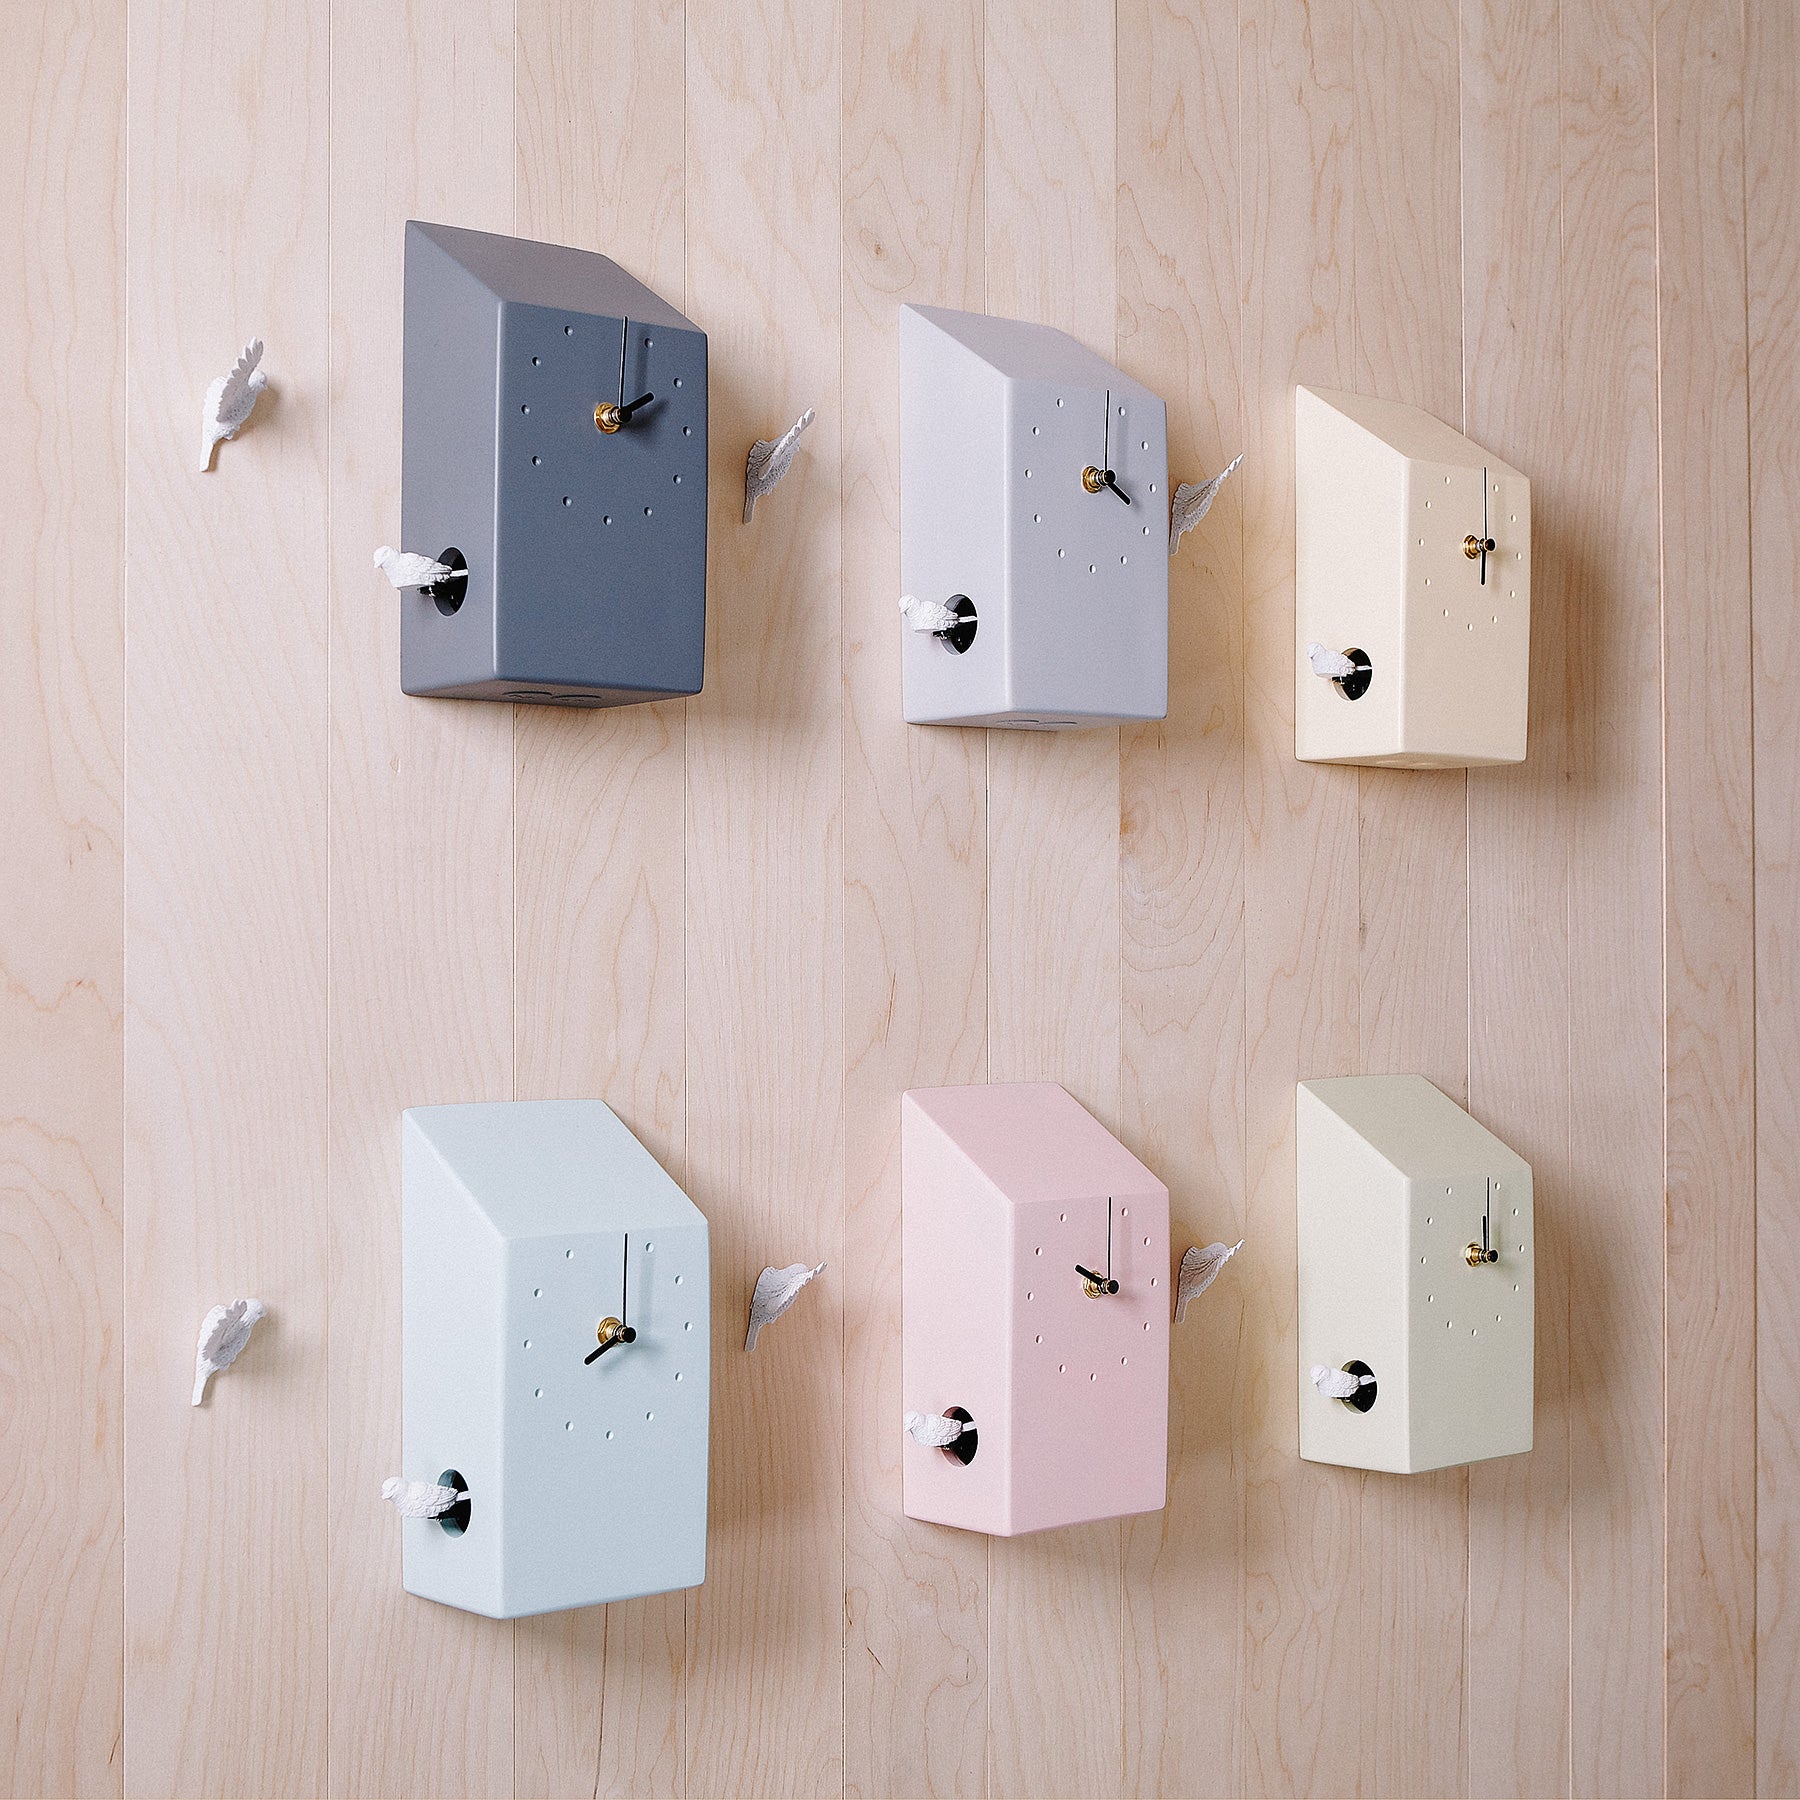 Blue Cuckoo Clock with Minimal and Modern Design